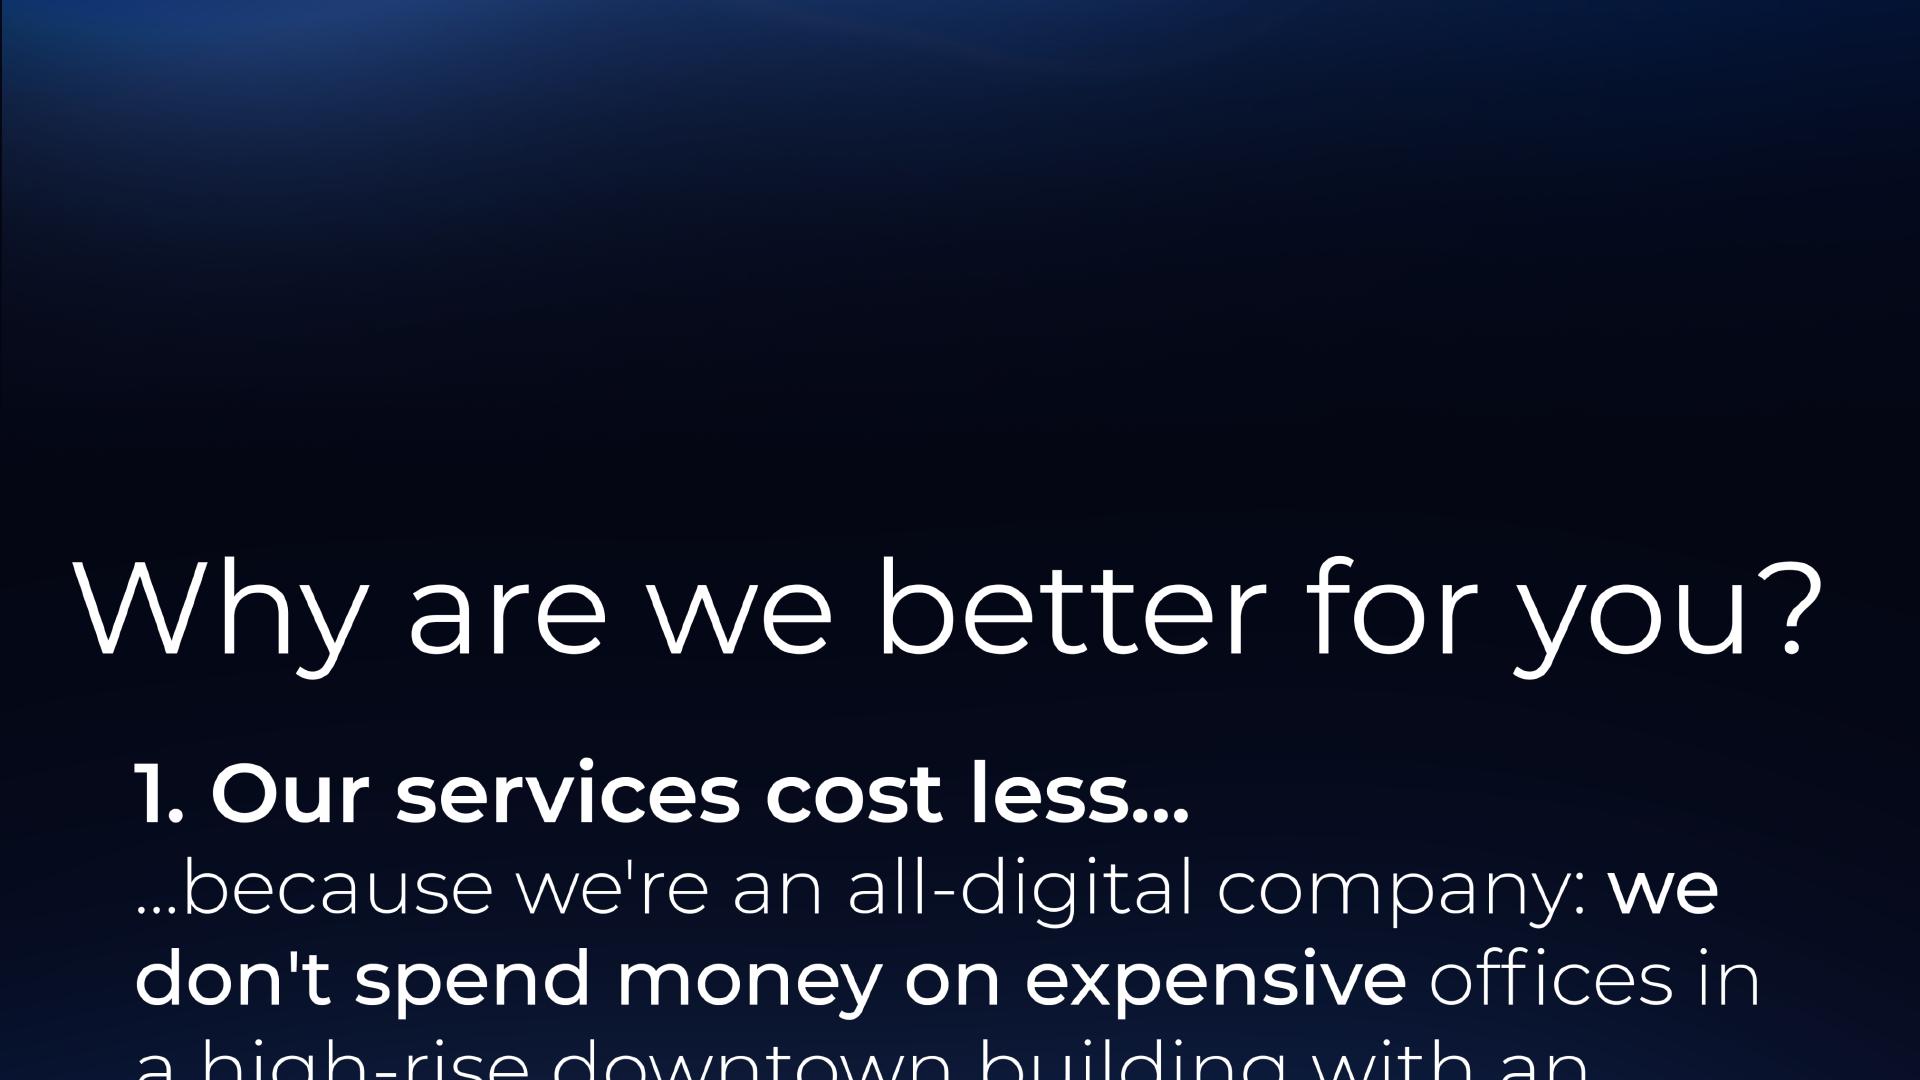 Why are we better for you? 1. Our services cost less because we're an all-digital company: we don't spend money on expensive offices in a high-rise downtown building with an ...